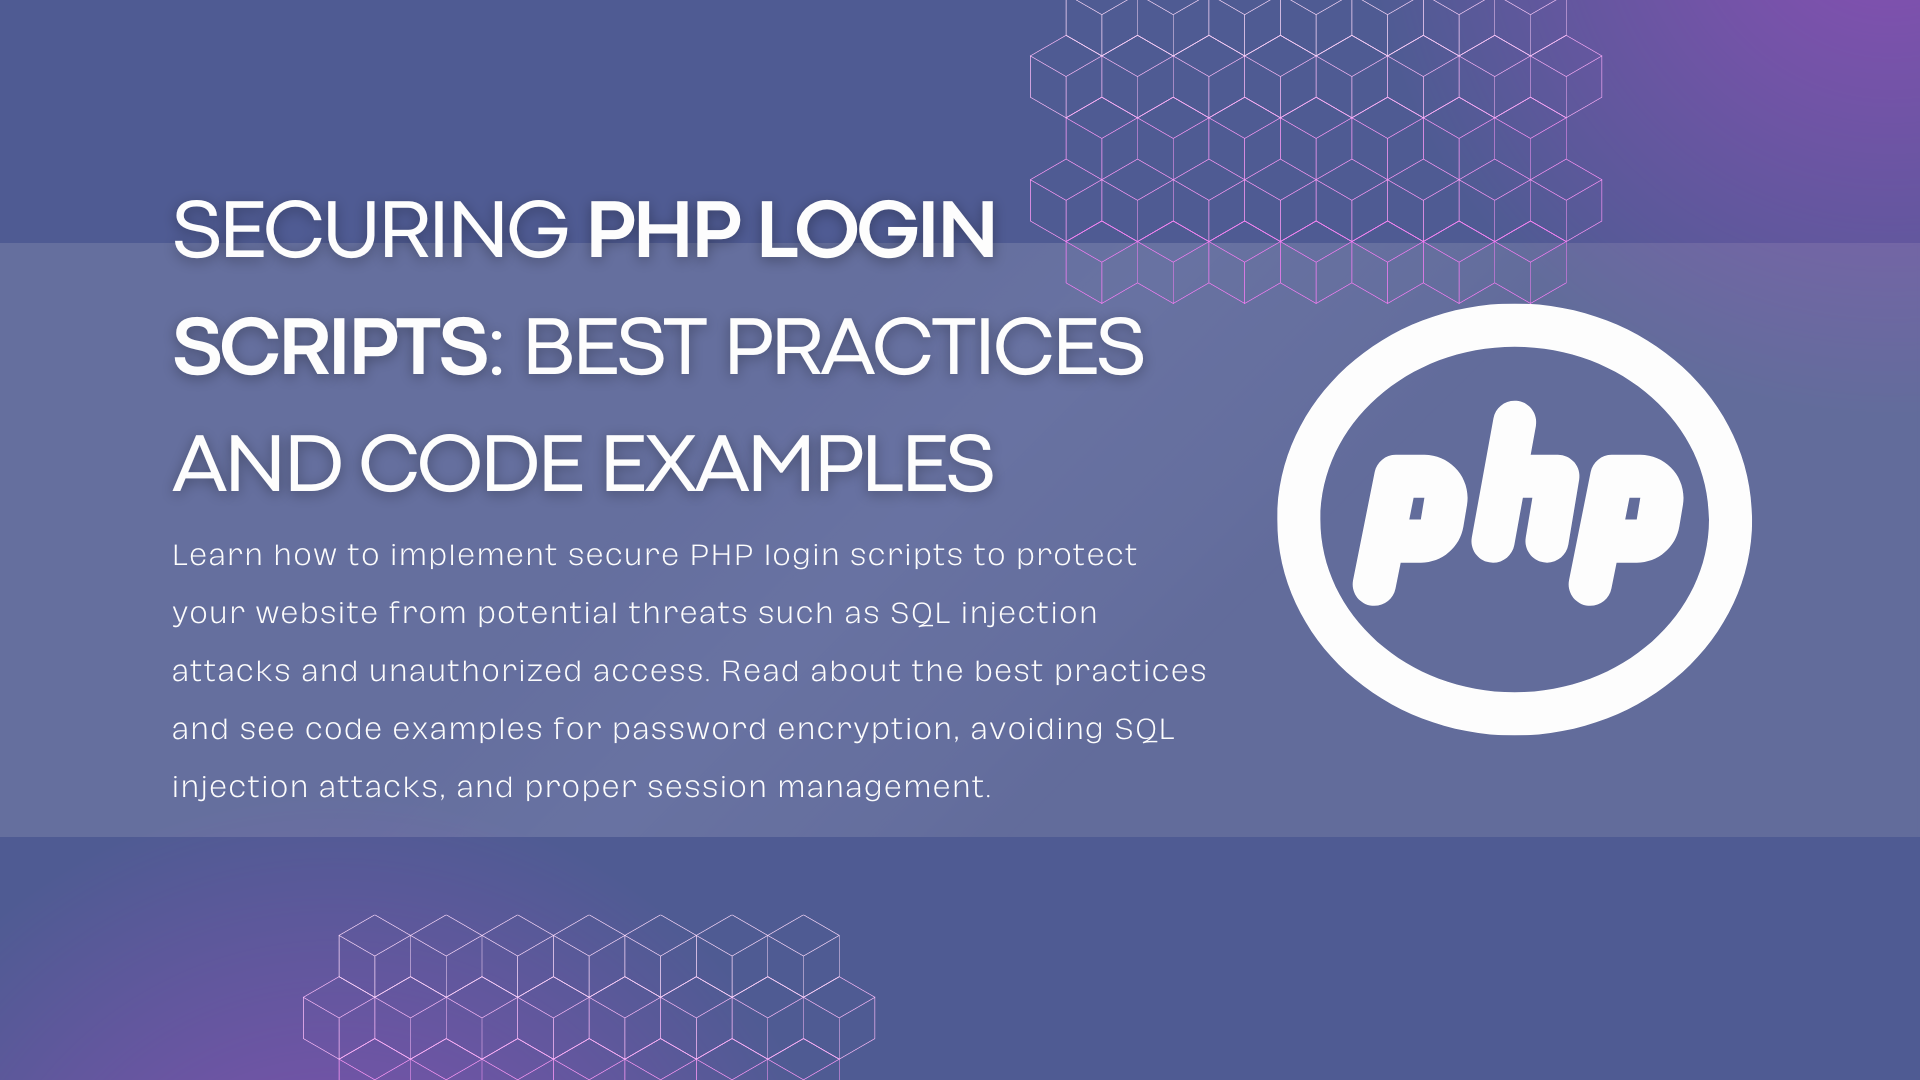 Securing PHP Login Scripts: Best Practices and Code Examples